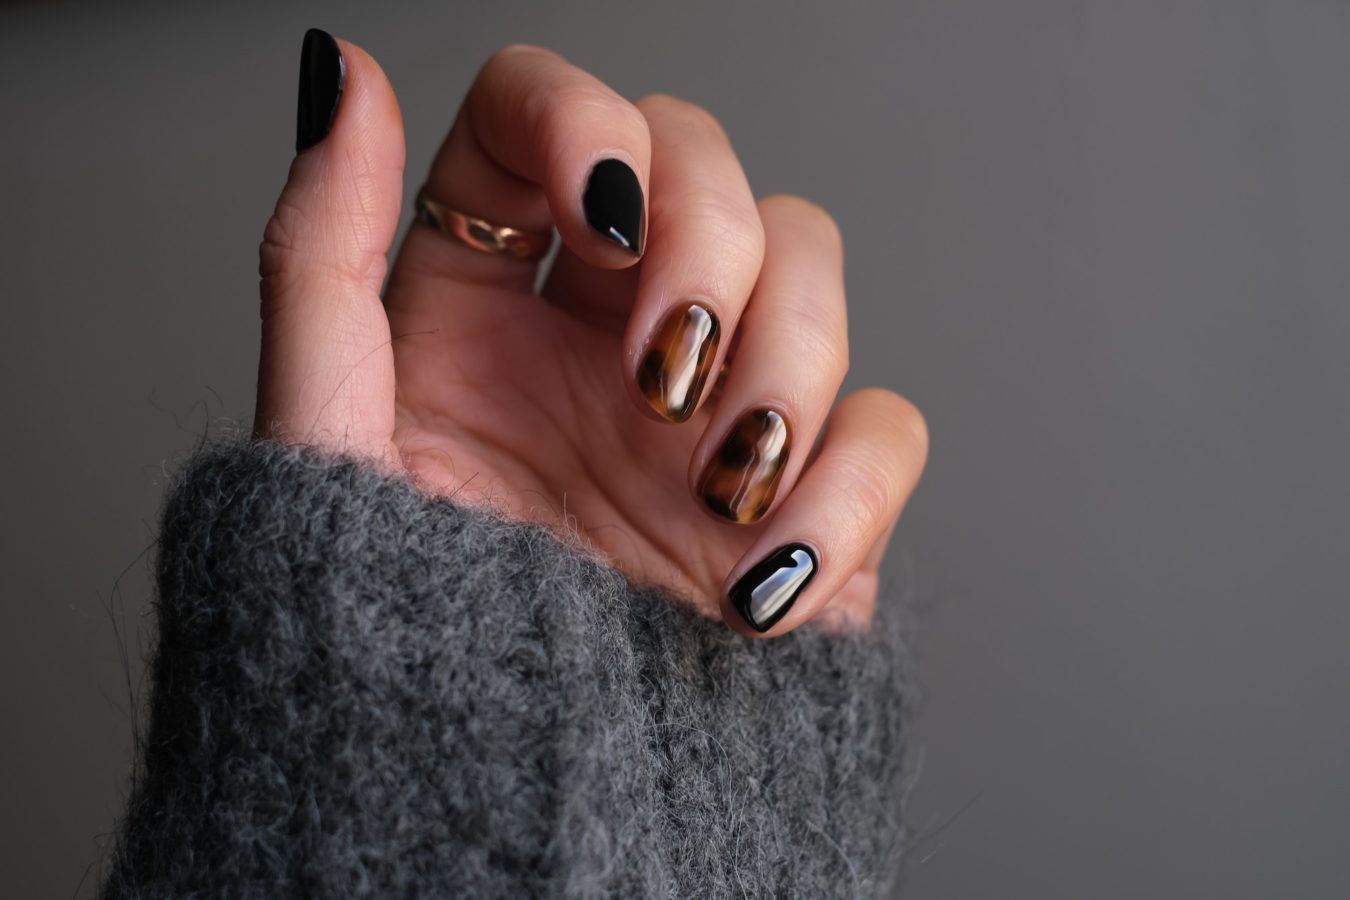 5 places to buy press-on nails in KL for instant glam at home